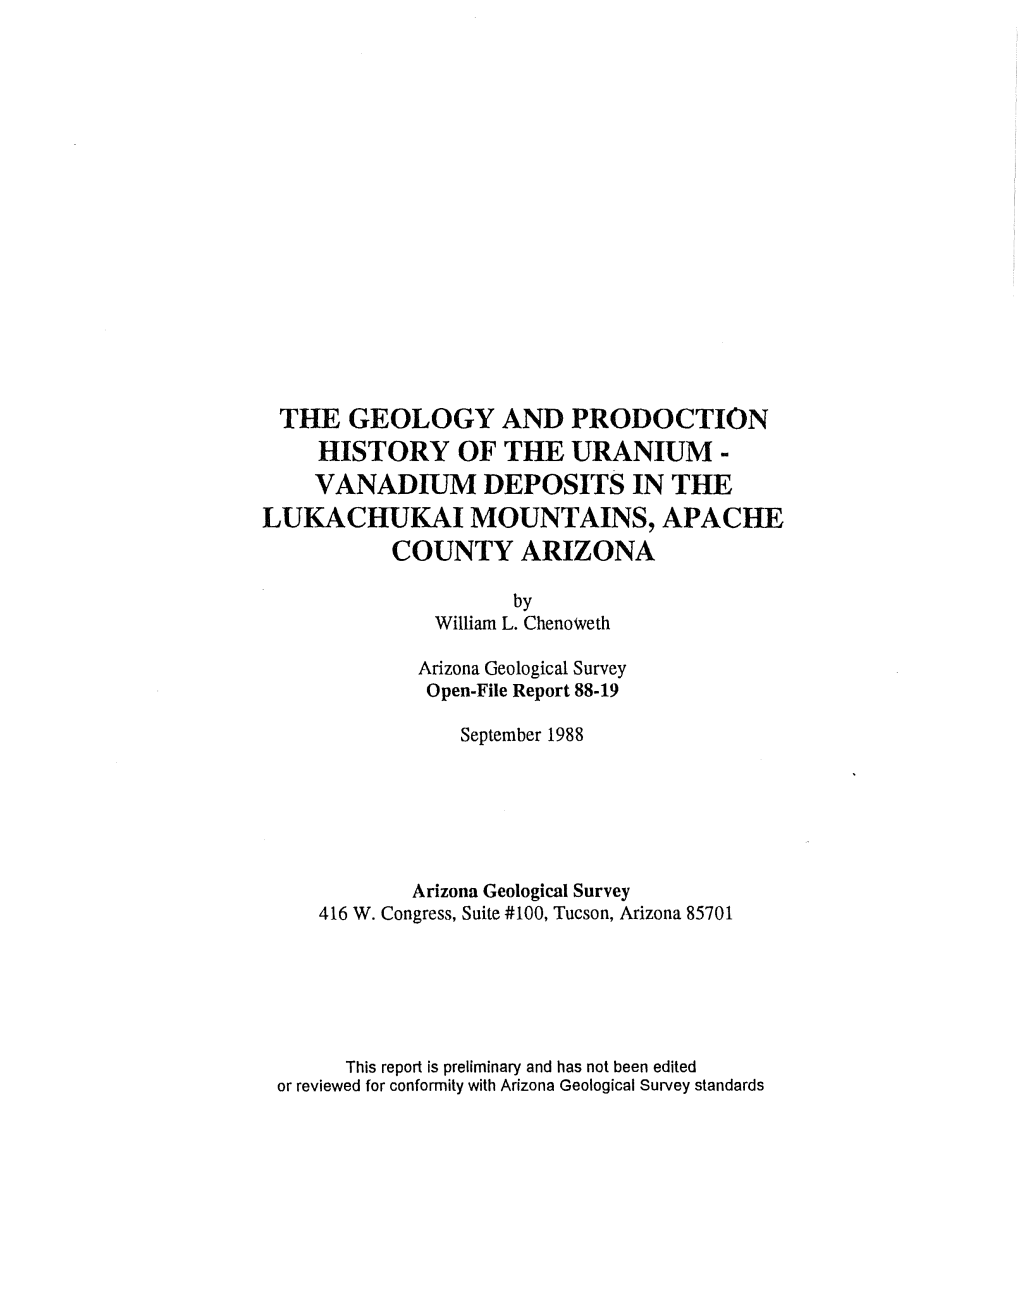 The Geology and Production History of the Uranium-Vanadium Deposits In